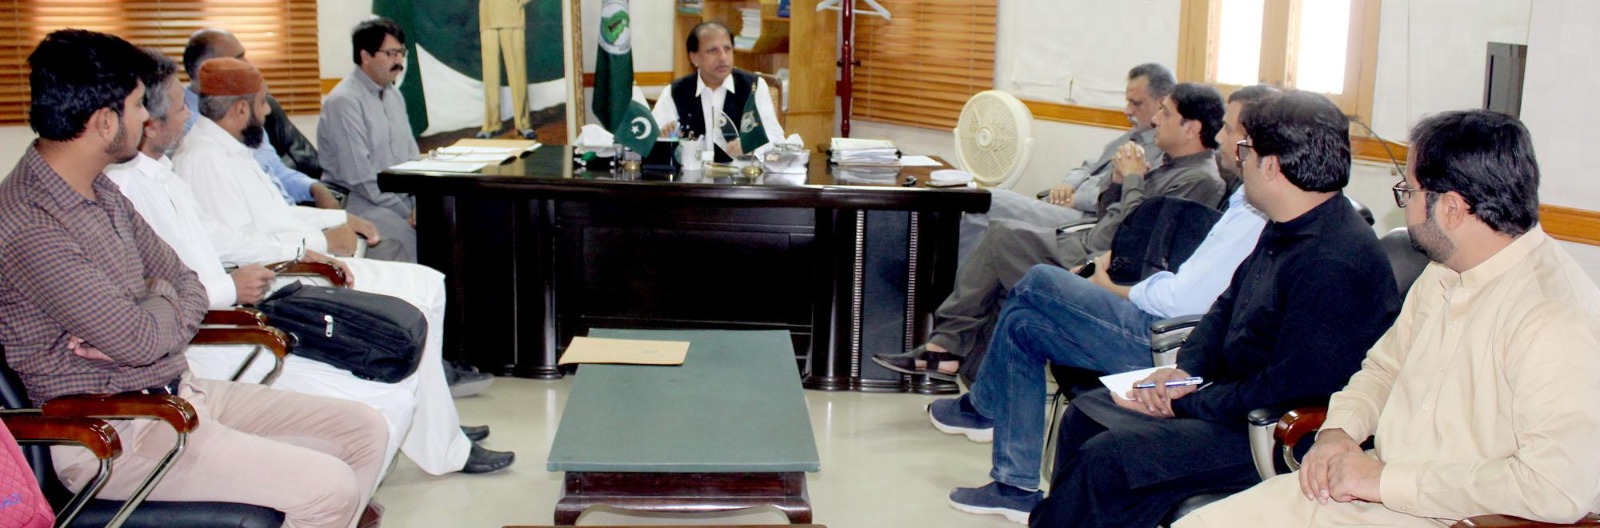 Sindh-University-Meeting-Sindh-Courier-3